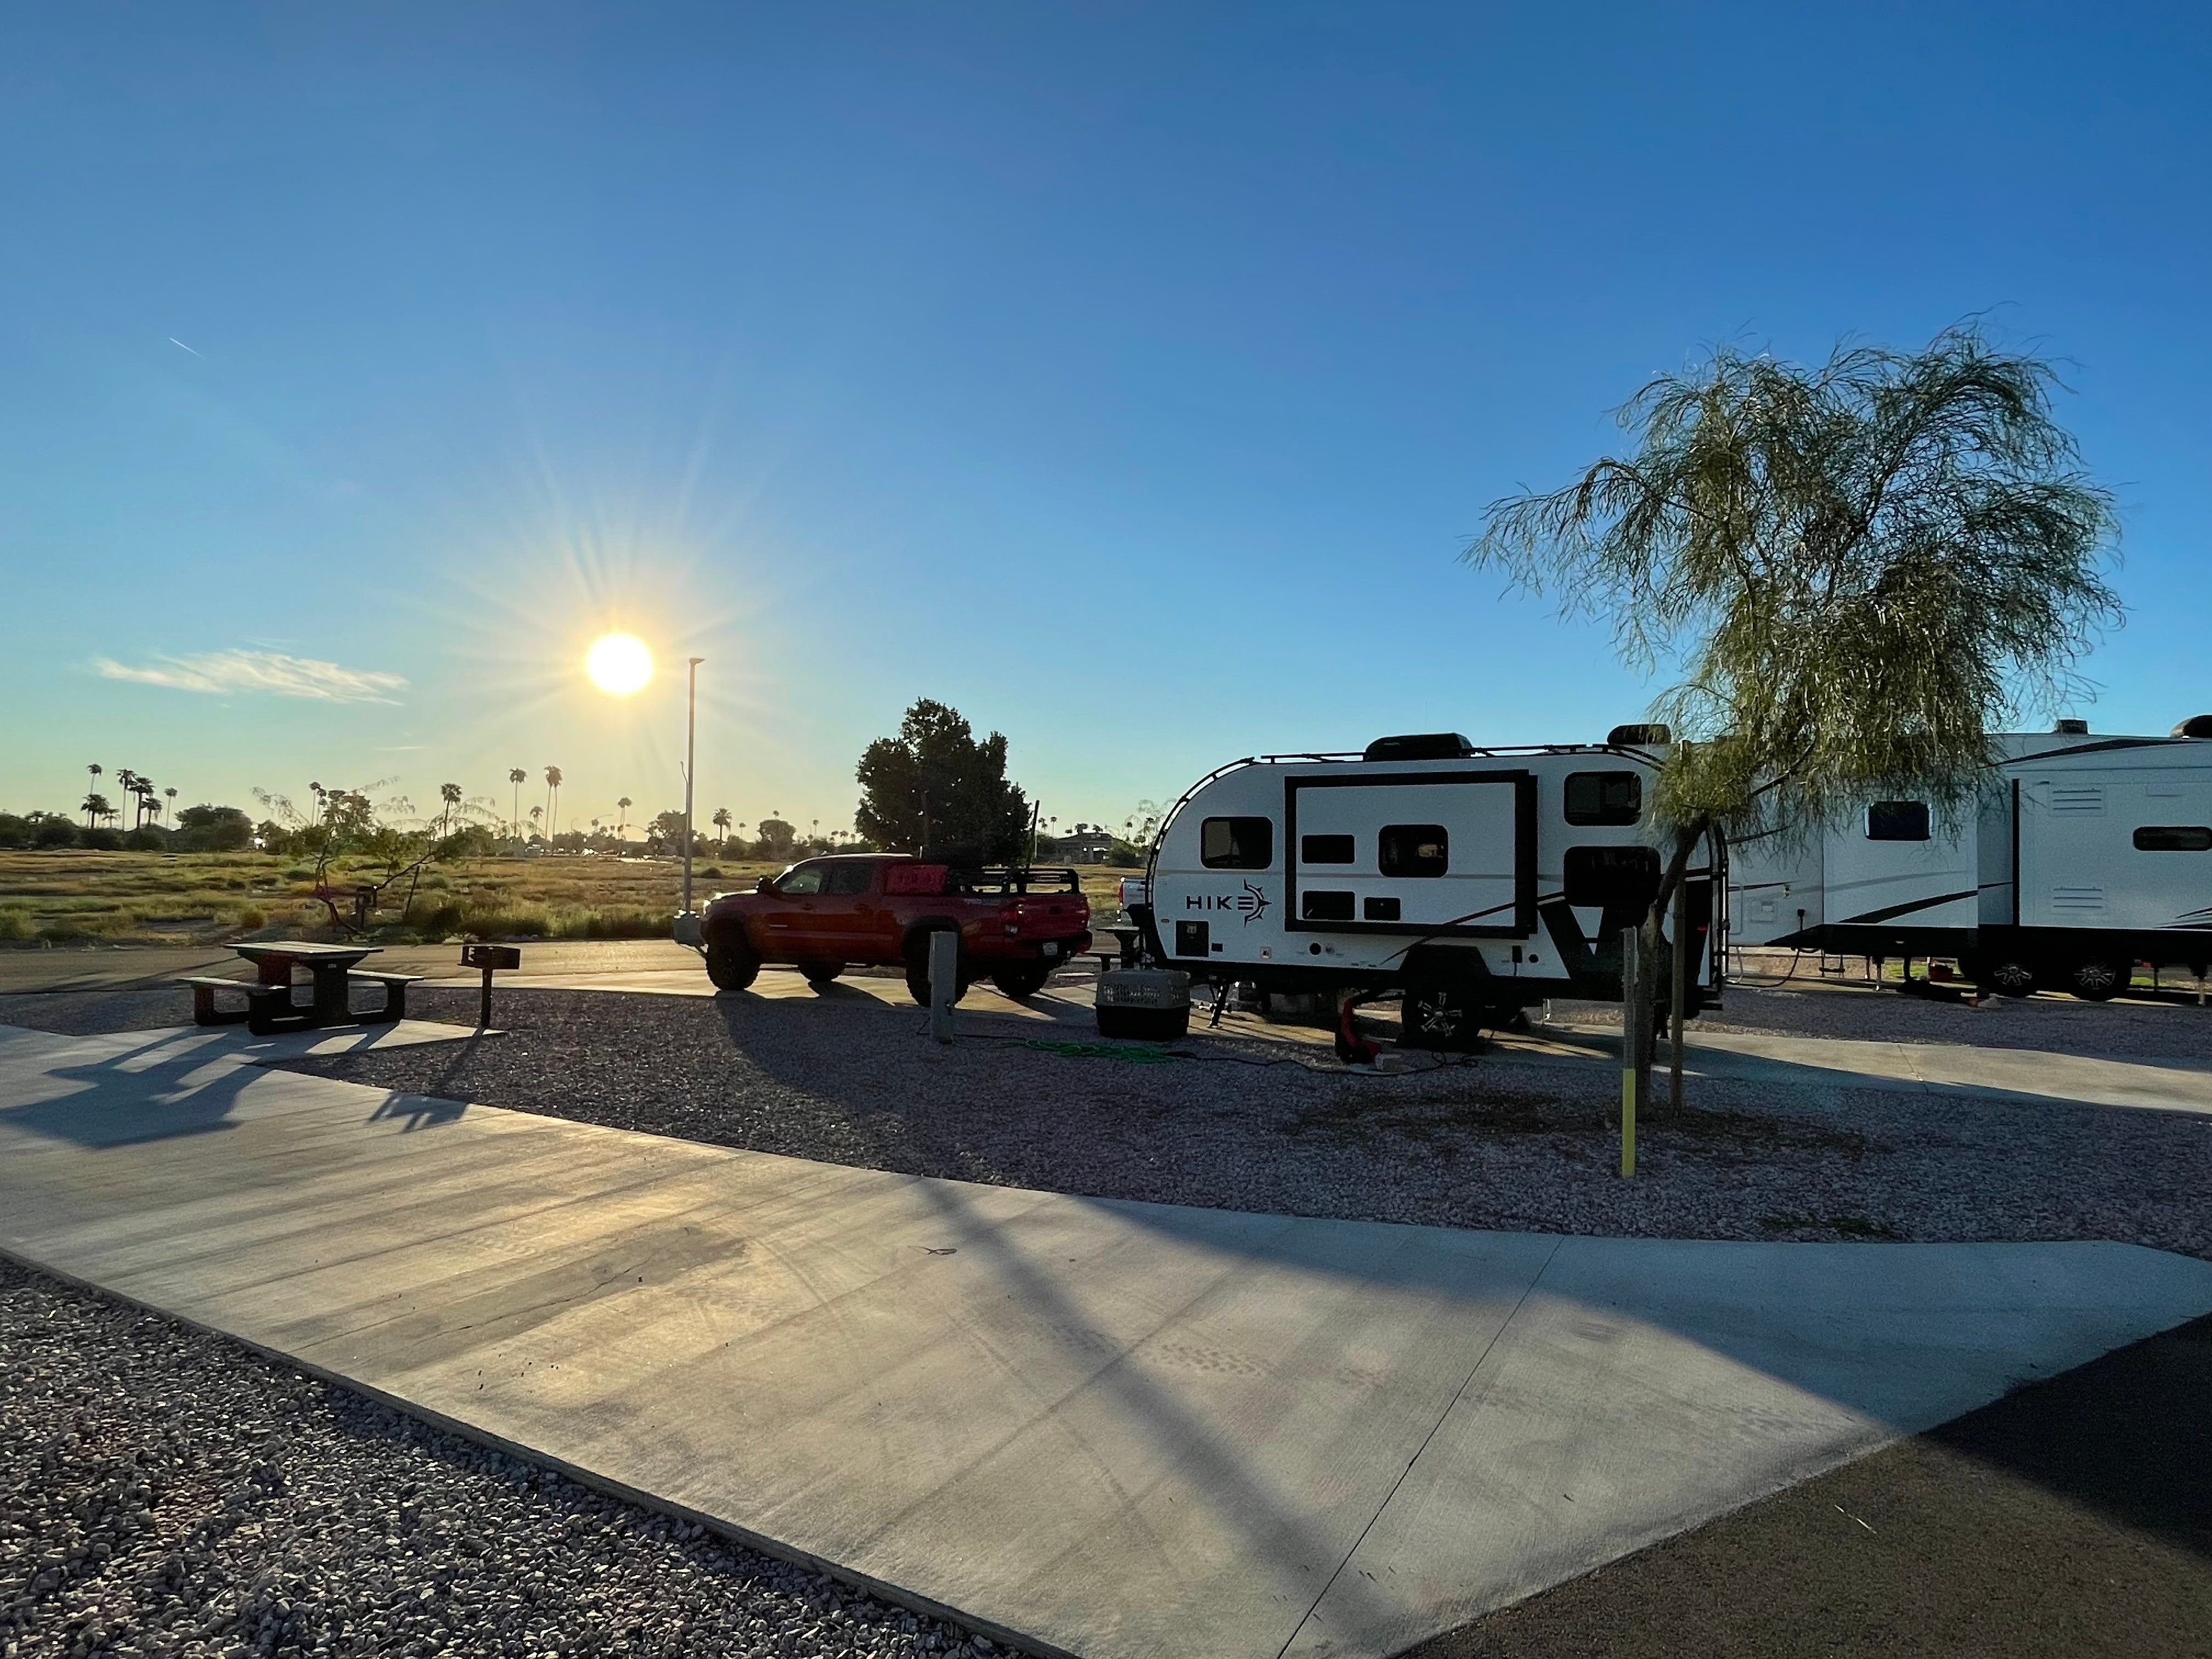 Camper submitted image from Saguaro Skies - Luke AFB Famcamp - 1